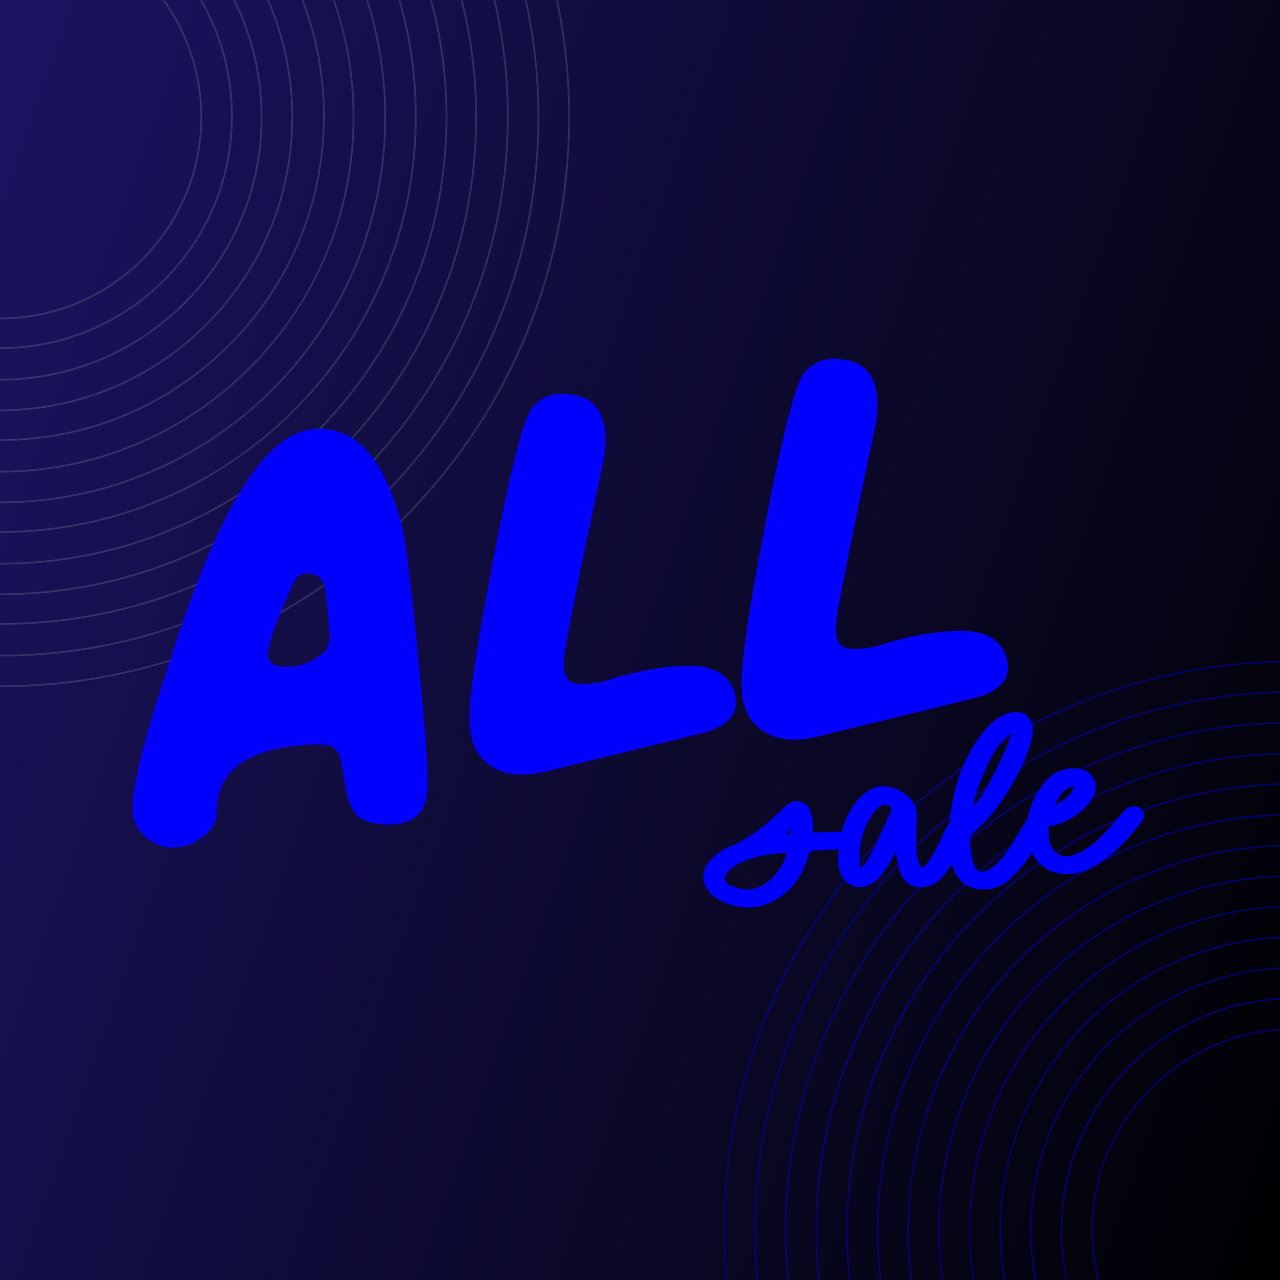 Cyber Monday - All Sale